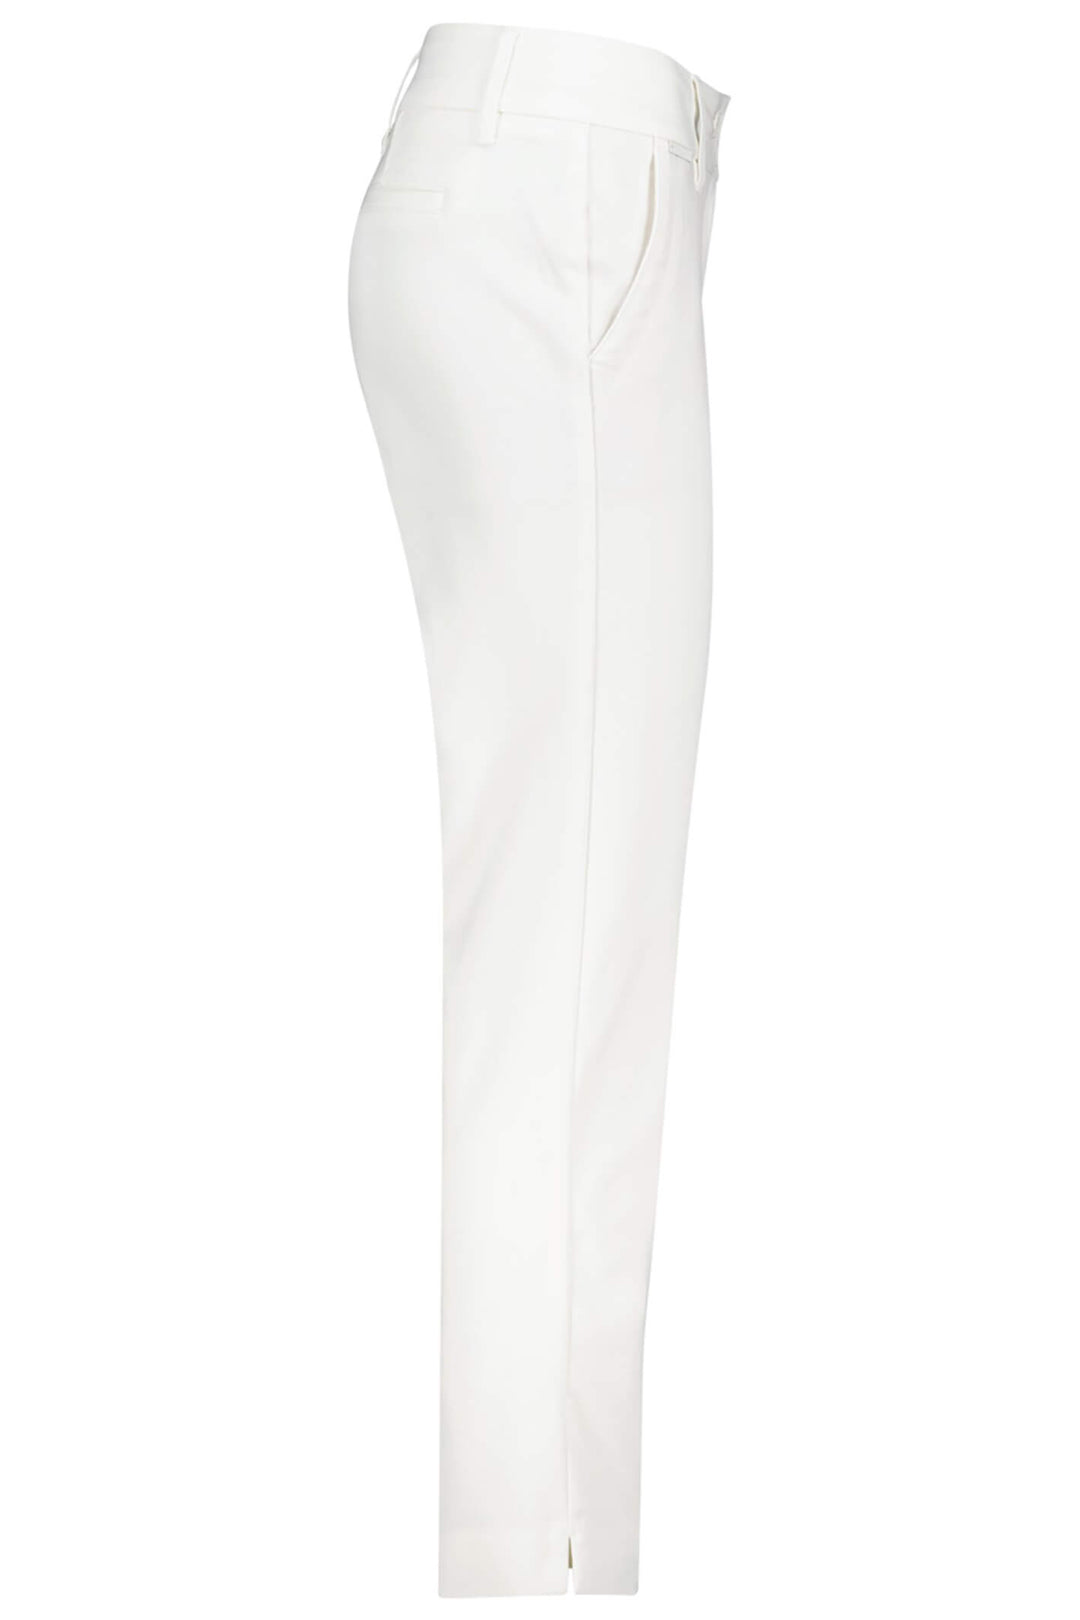 Red Button SRB3944 Diana Off White Smart Colour Trousers - Olivia Grace Fashion